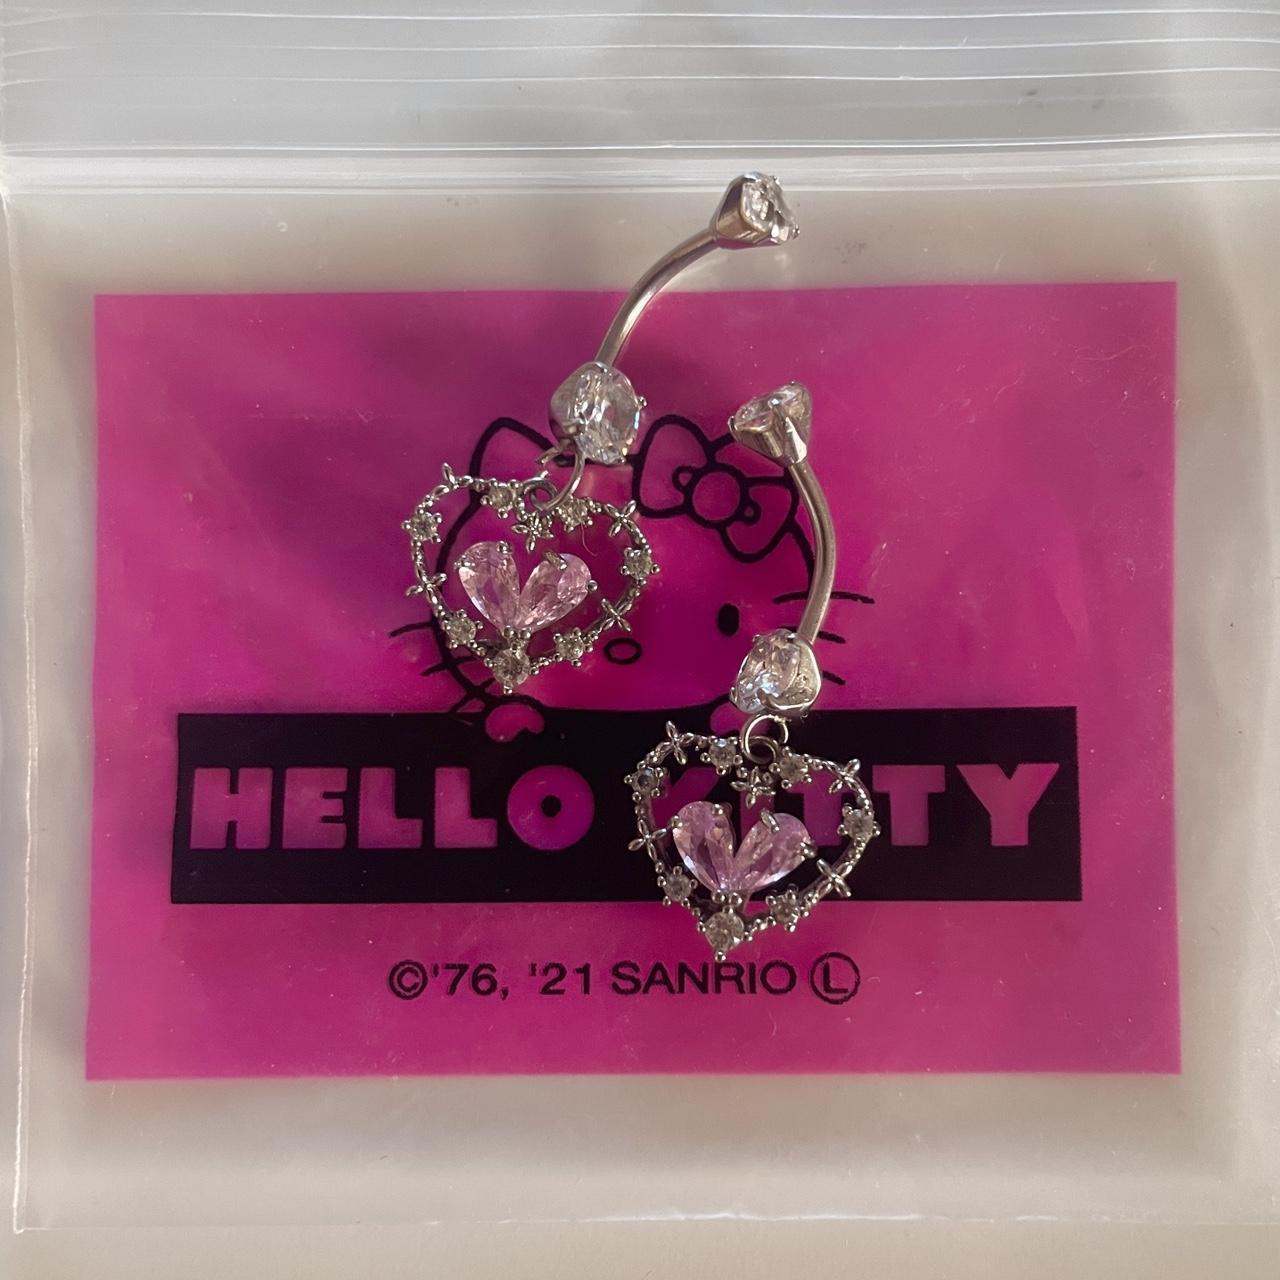 Women's Silver and Pink Jewellery